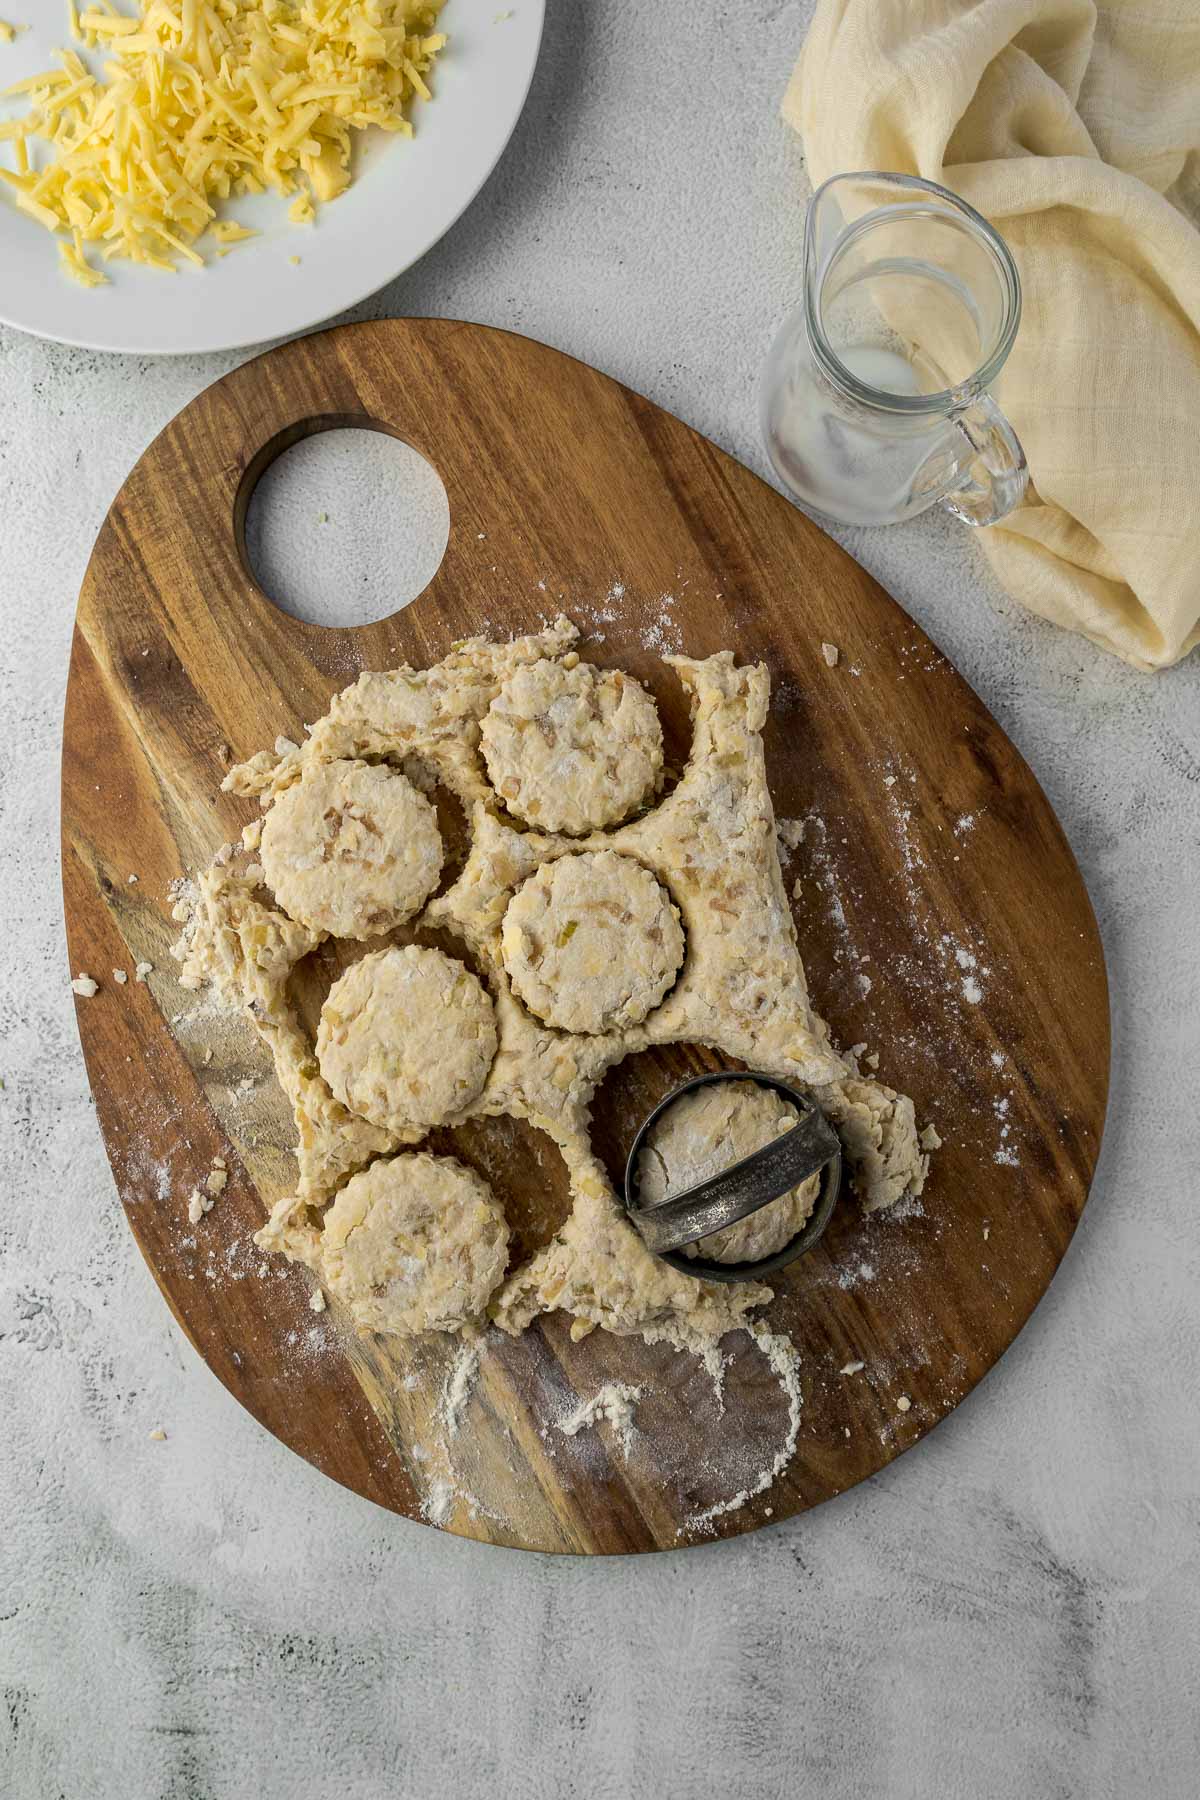 Scones cut out of dough on a board.